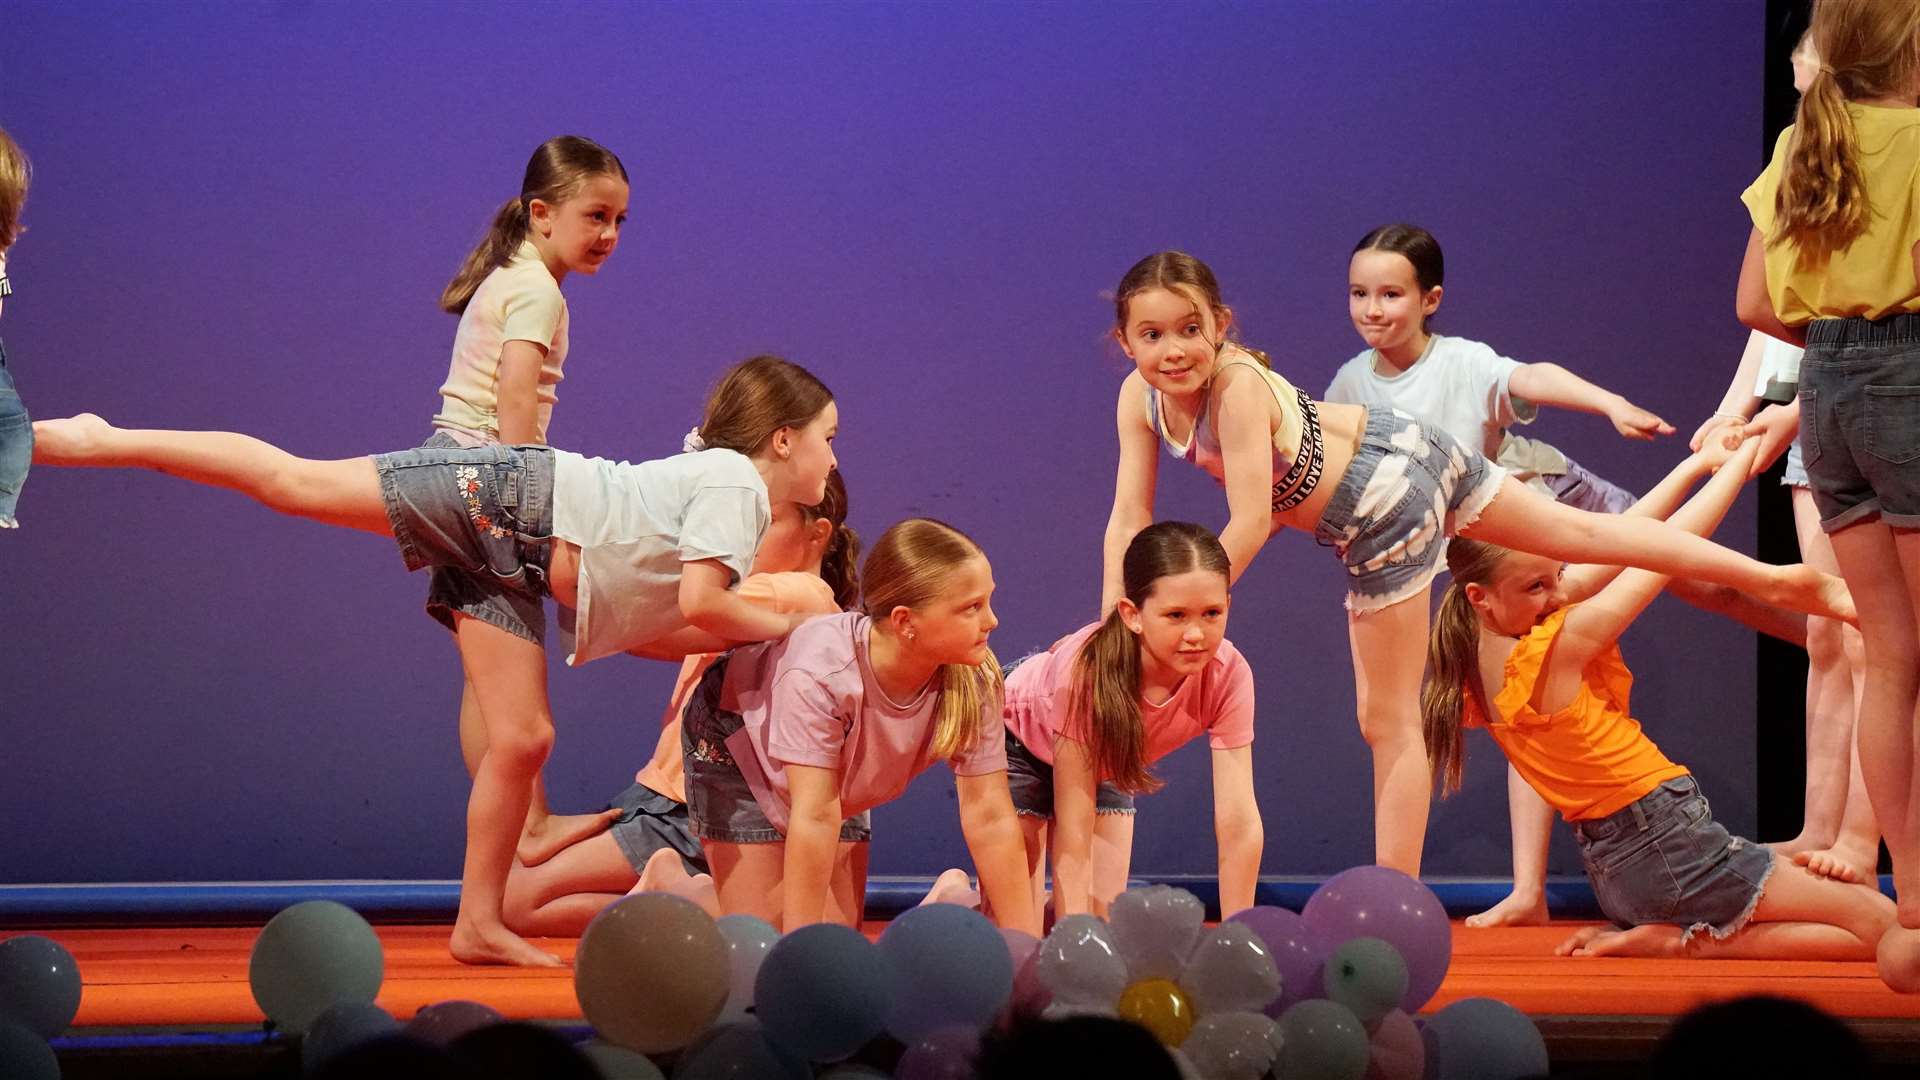 North Apex Gymnastics Club Summer Show 2023 at Wick Assembly Rooms on June 1. Picture: DGS